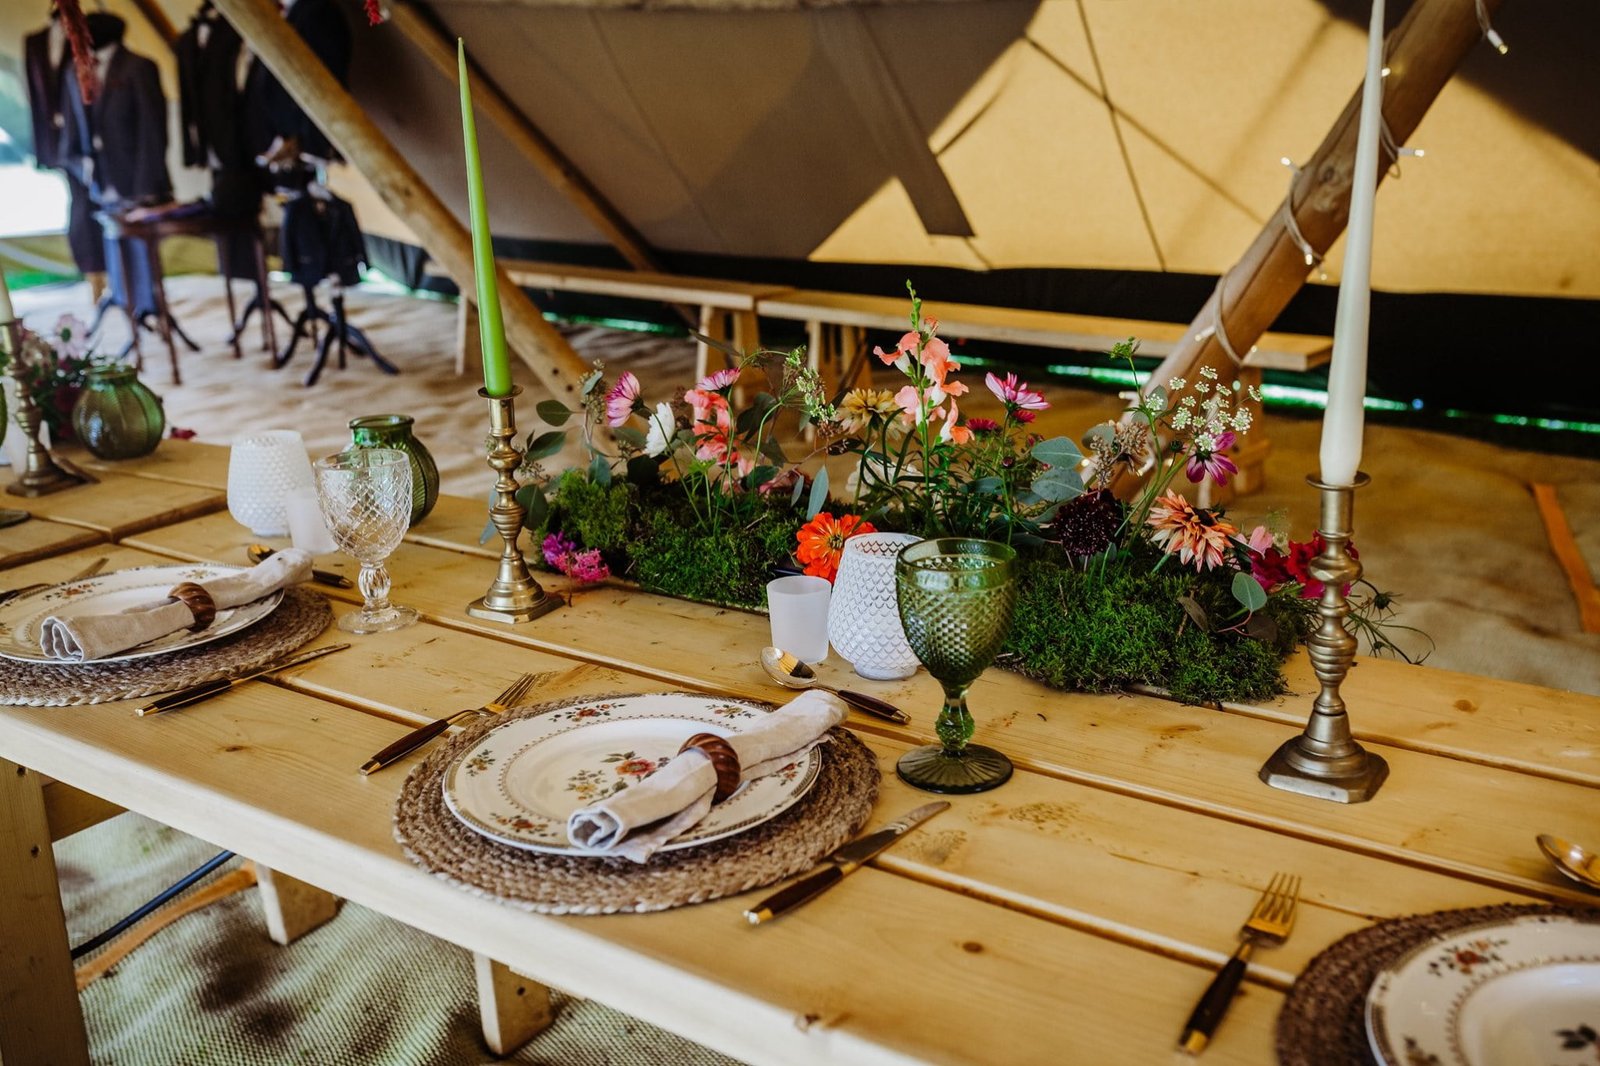 Tipi wedding rustic table setting inspiration with wooden napkin holders, charming floral plates, glassware and candlesticks by Sally's Secrets prop hire